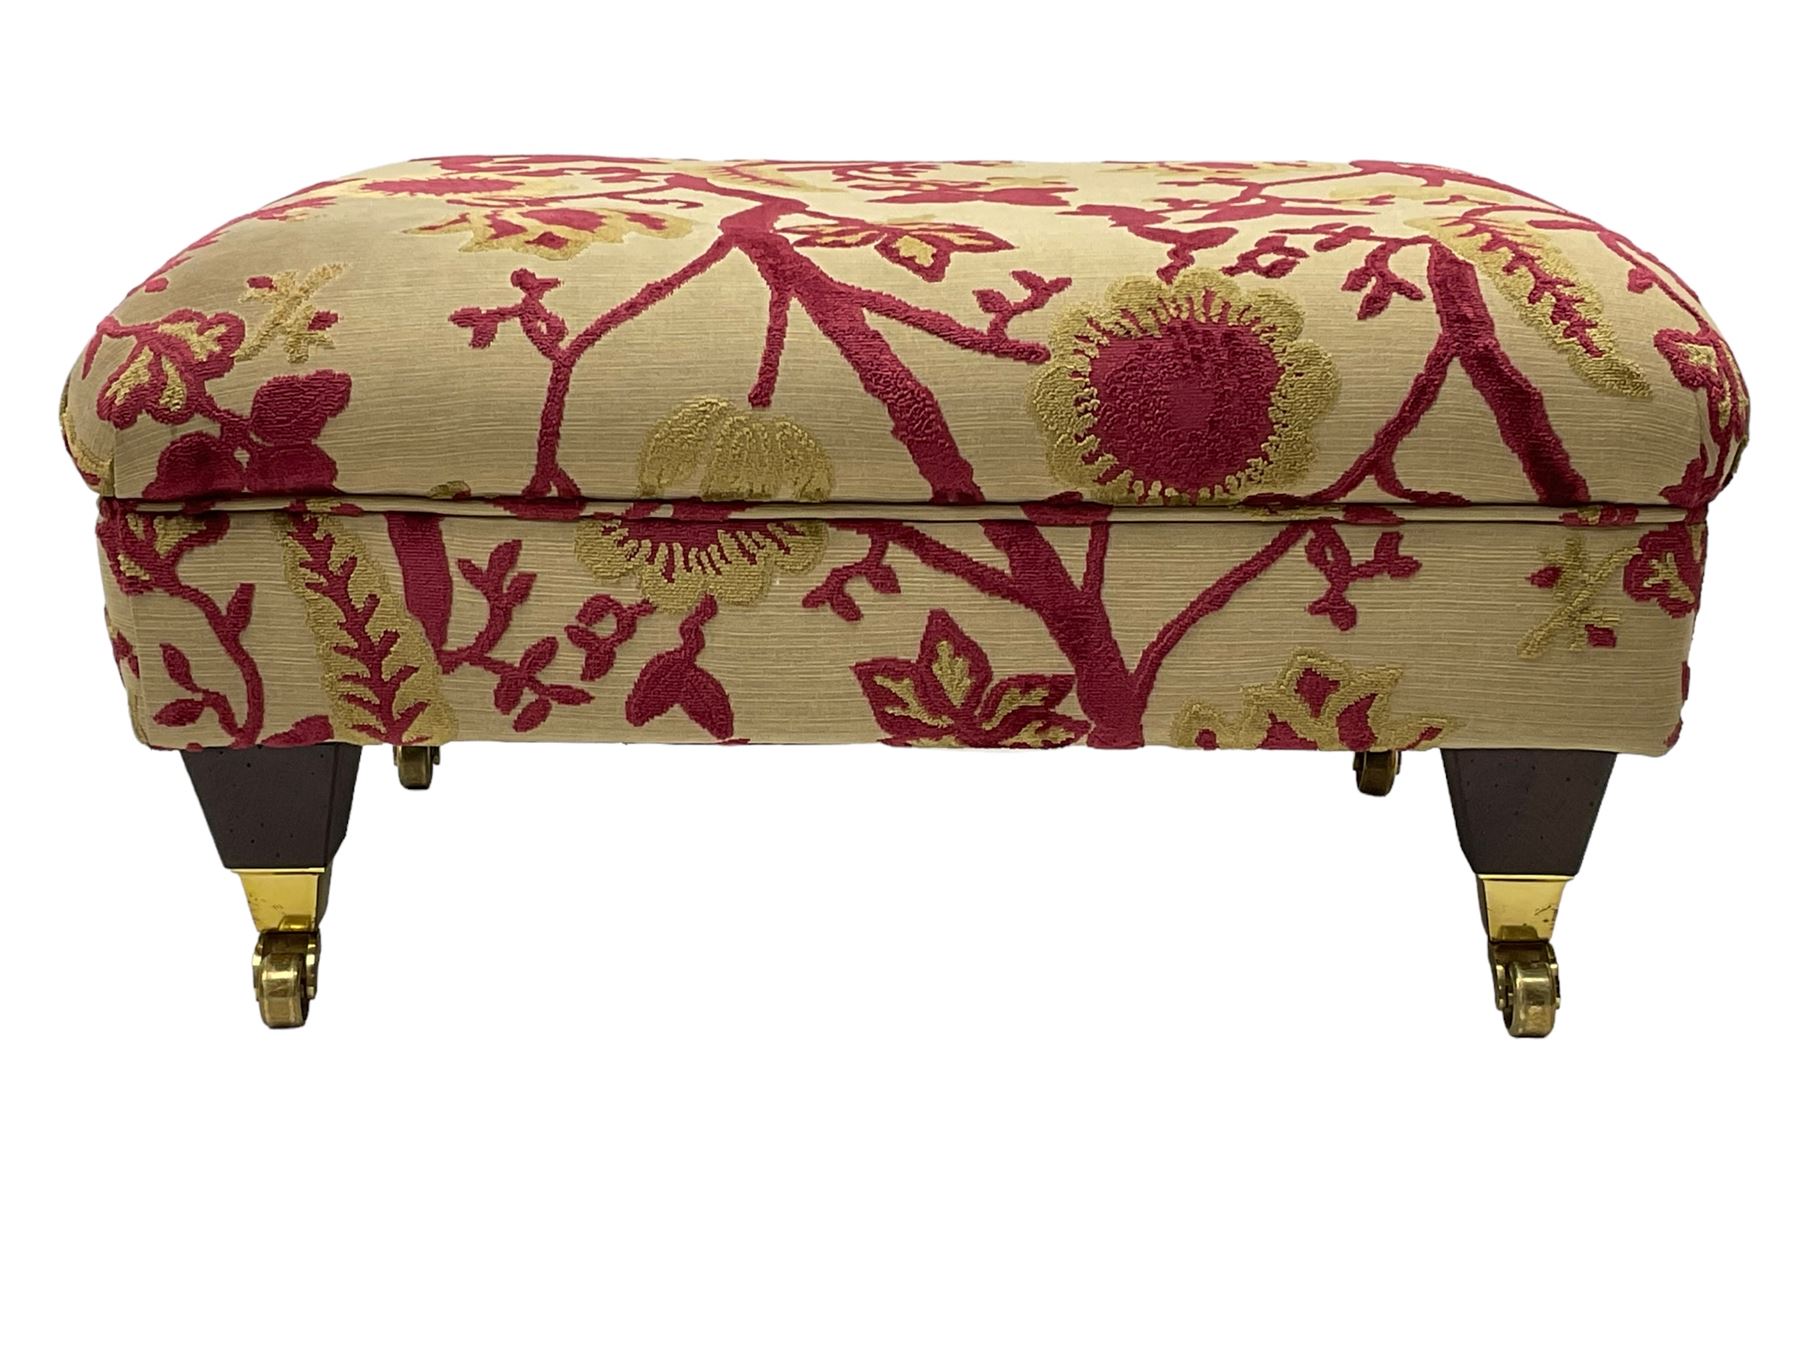 Three-piece lounge suite - large two-seat sofa upholstered in red and gold striped fabric (W185cm - Image 10 of 24